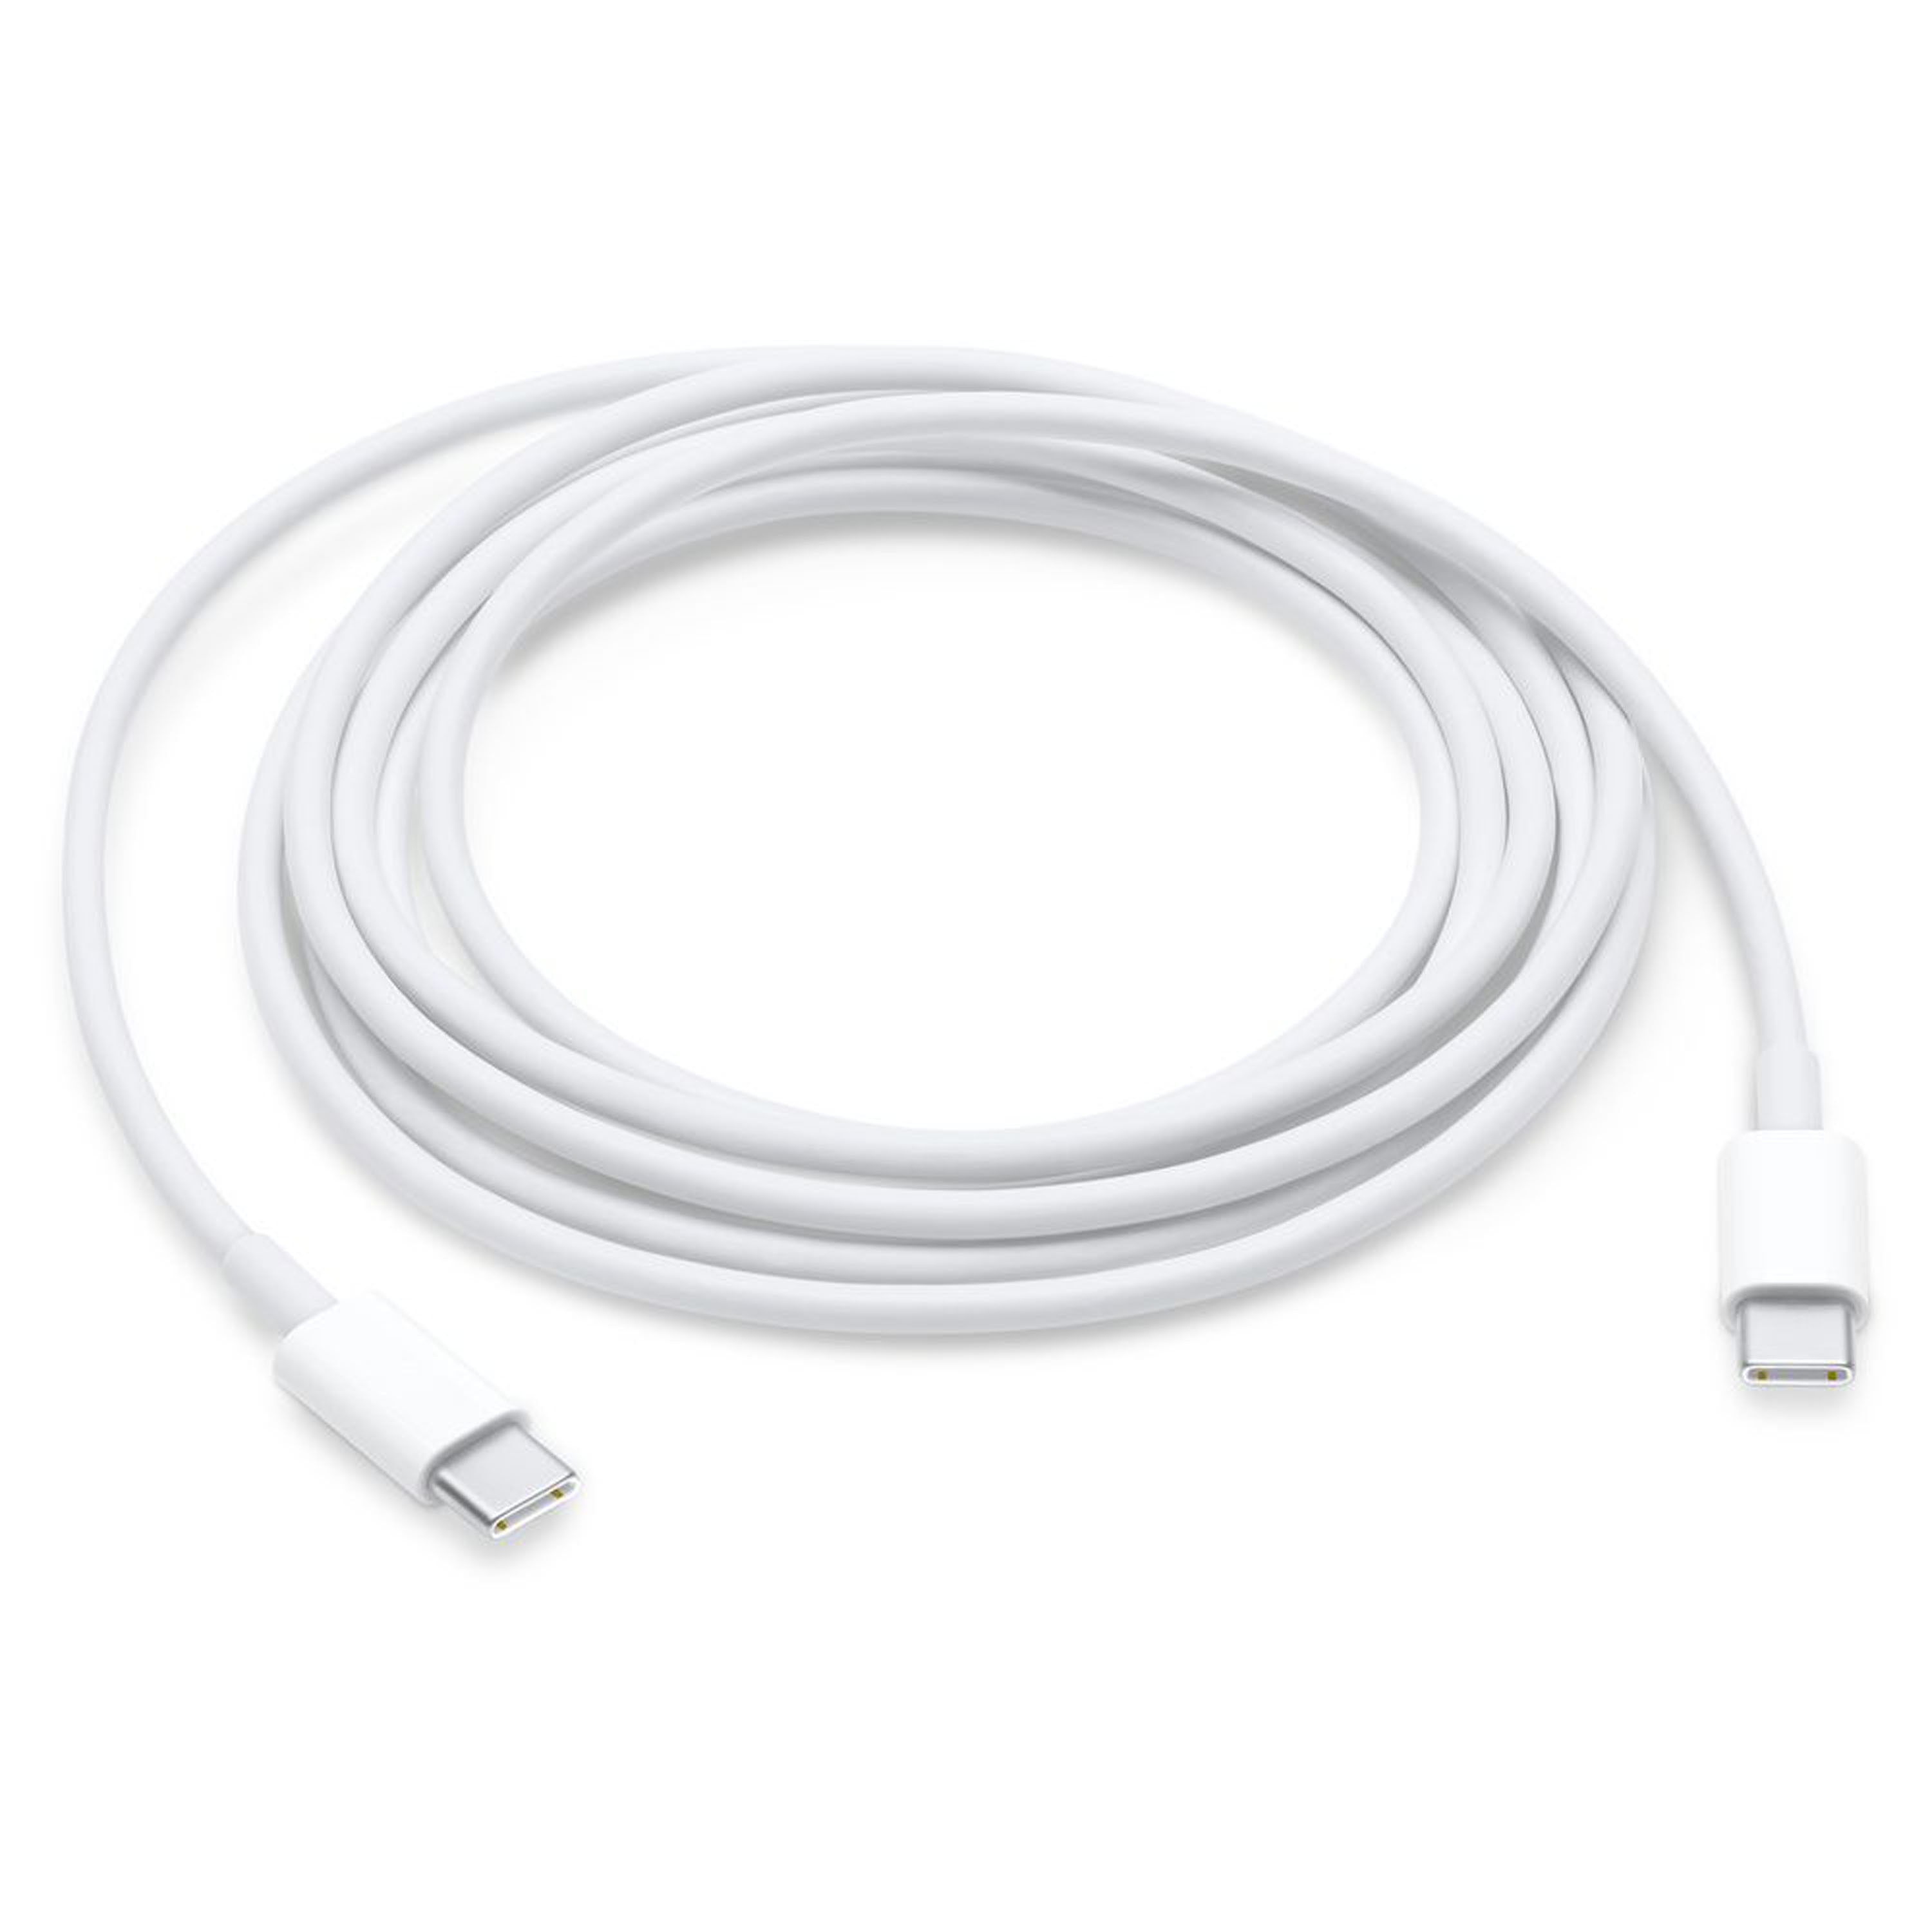 Apple USB Cables at 